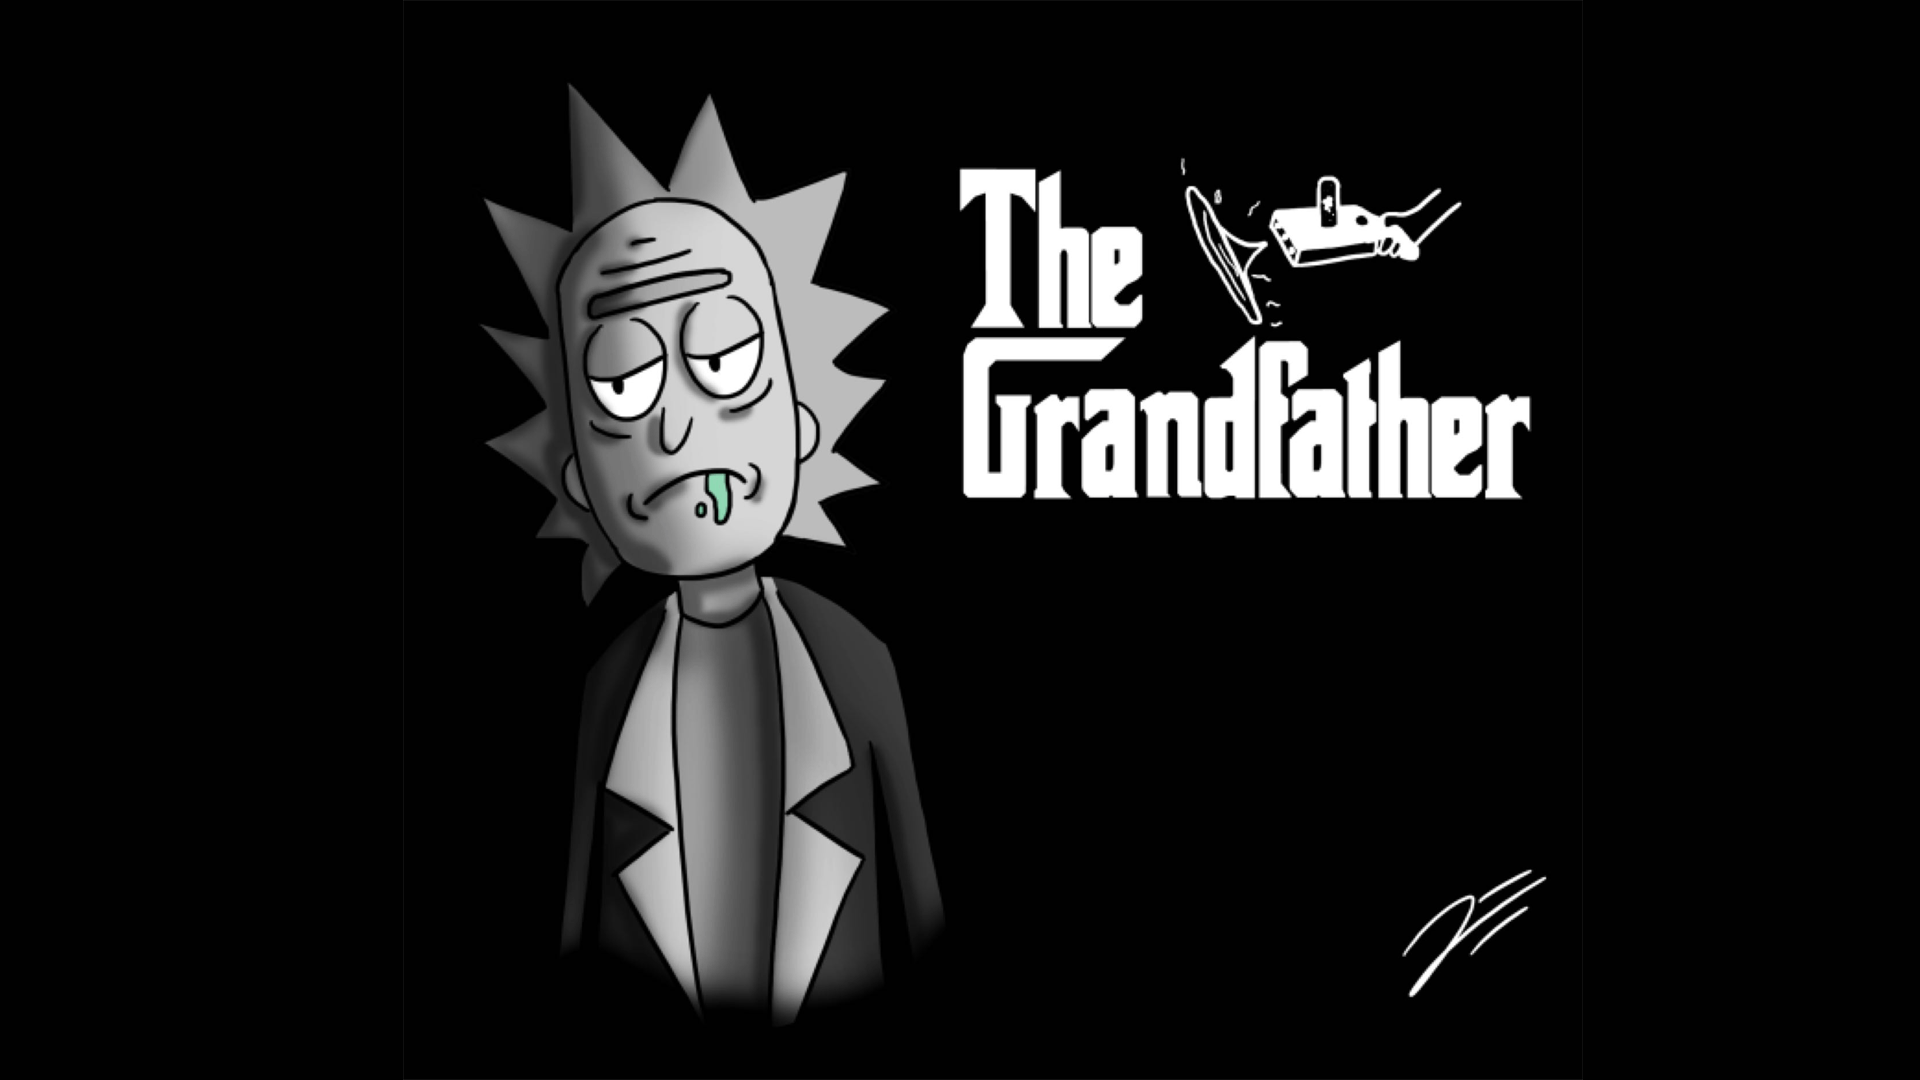 Grand Dad Wallpapers